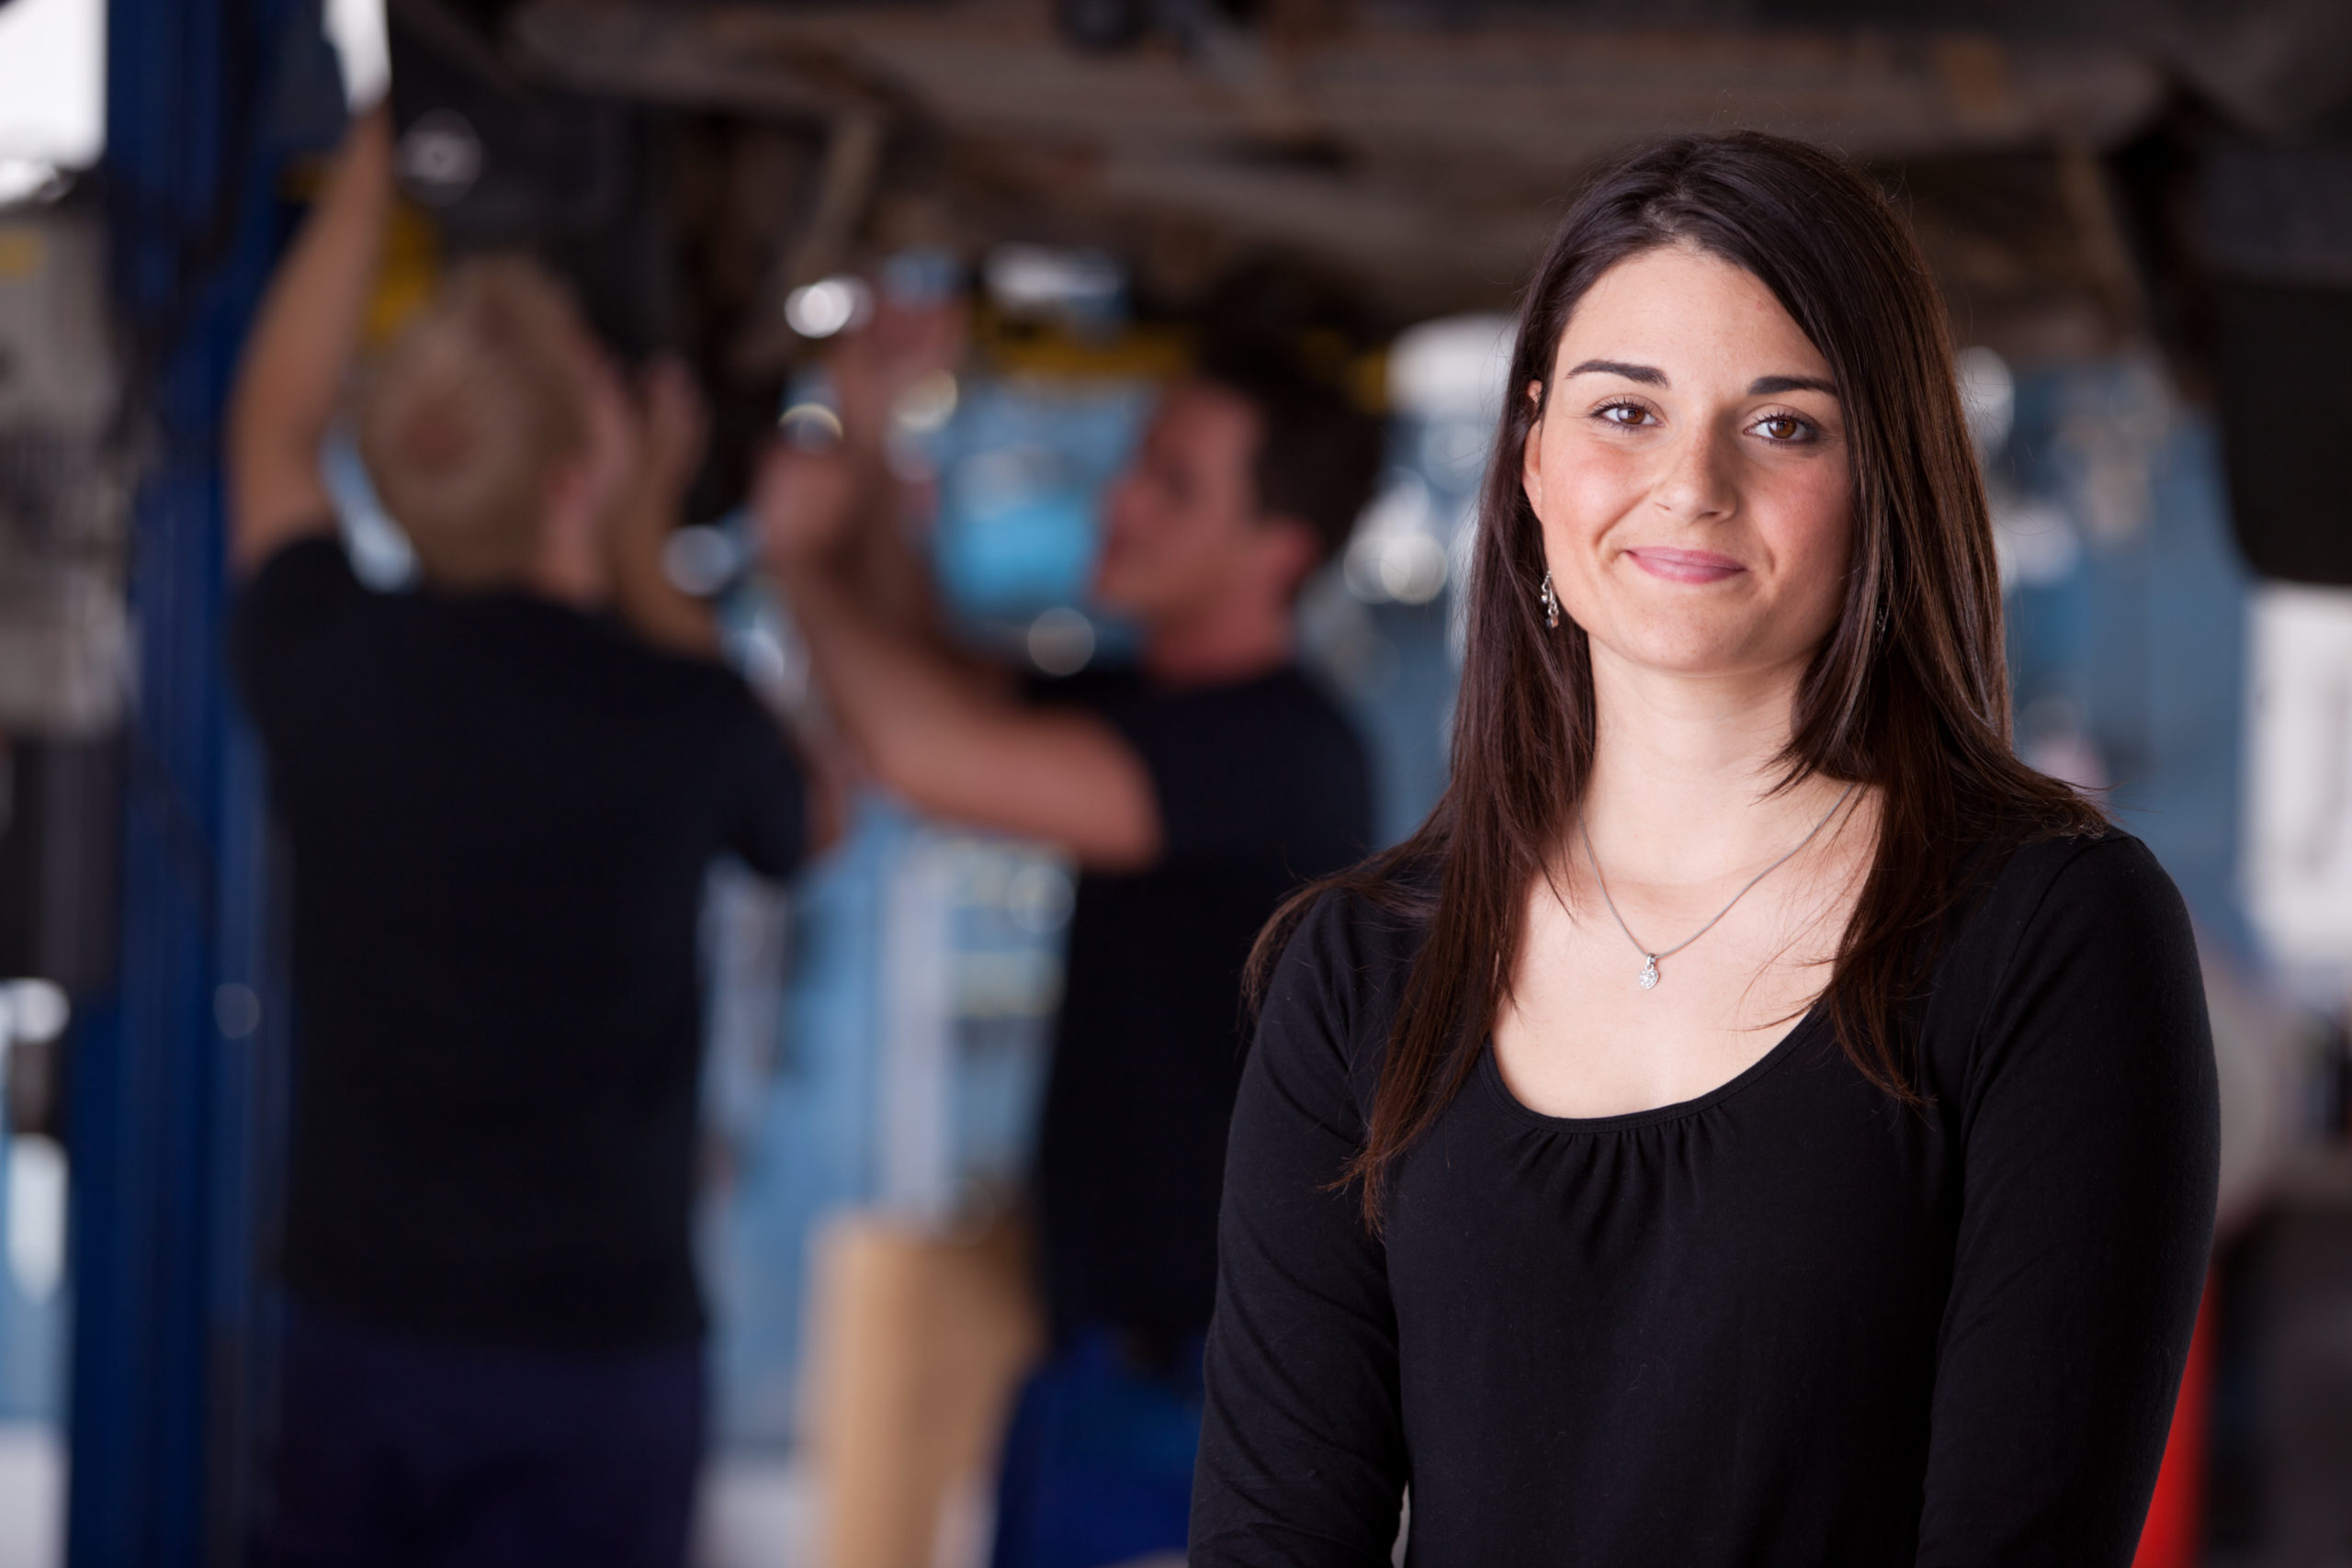 Image of woman pleased with service work performed